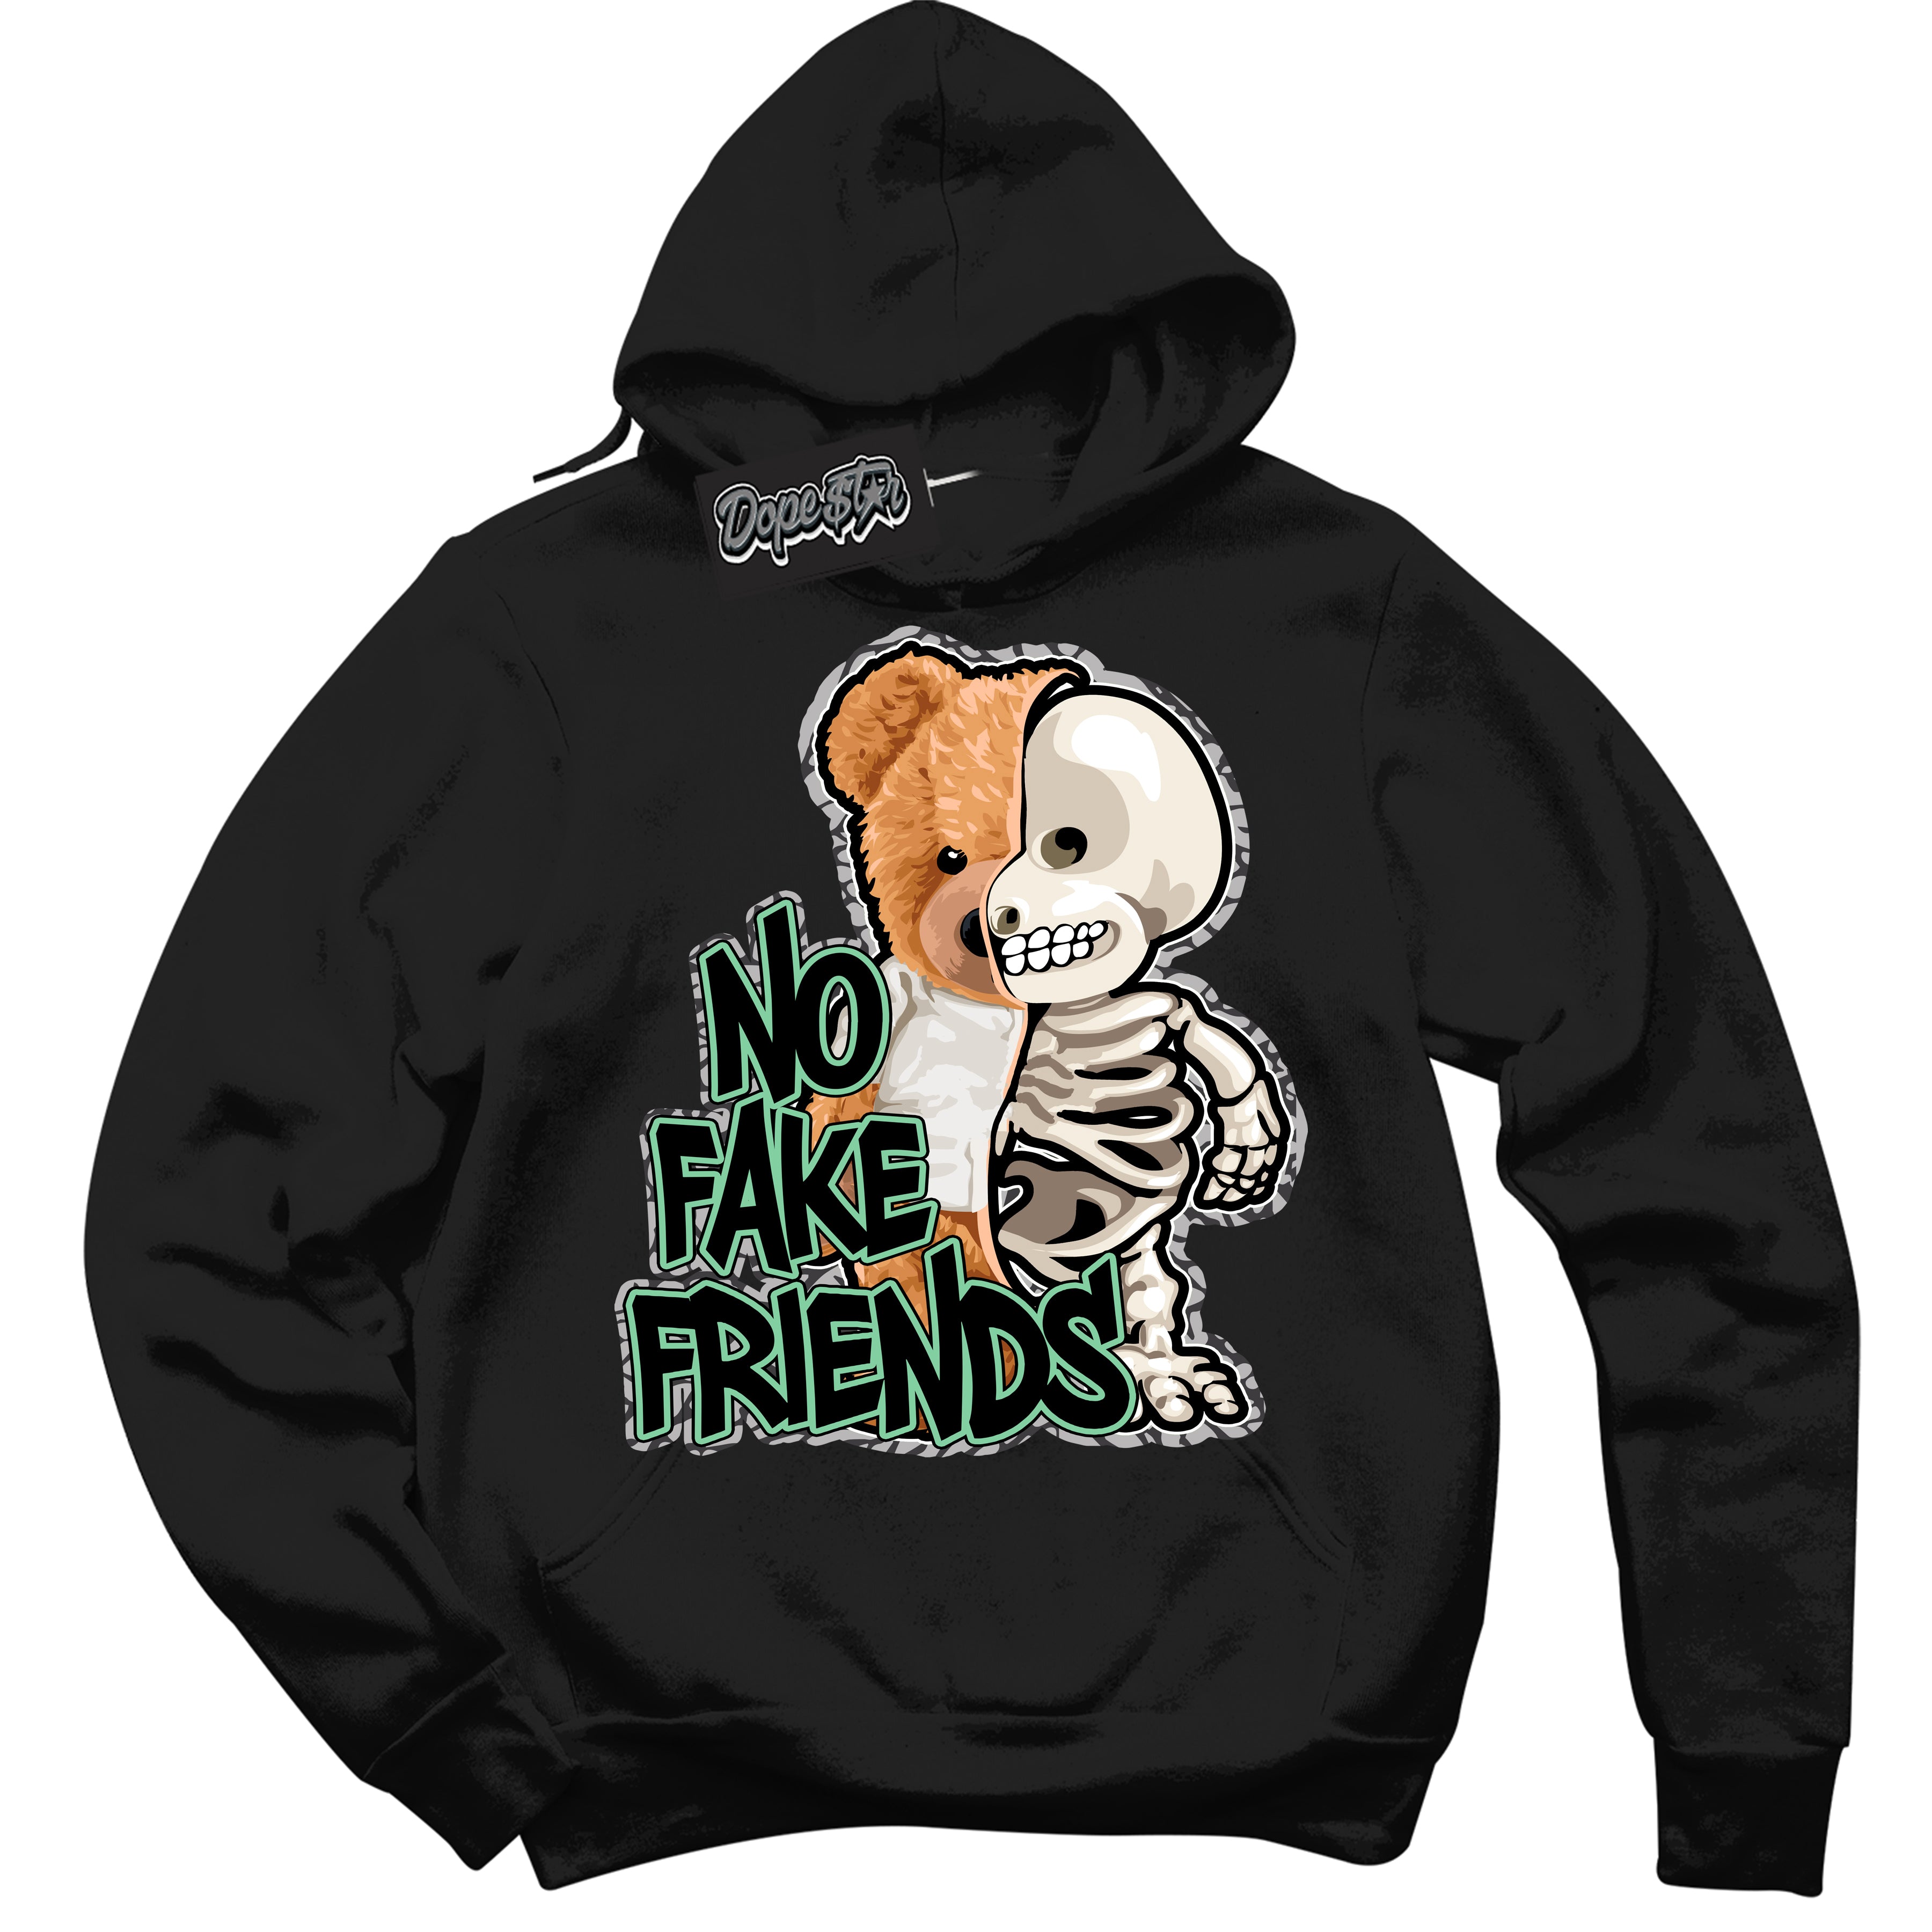 Cool Black Graphic DopeStar Hoodie with “ No Fake Friends “ print, that perfectly matches Green Glow 3S sneakers